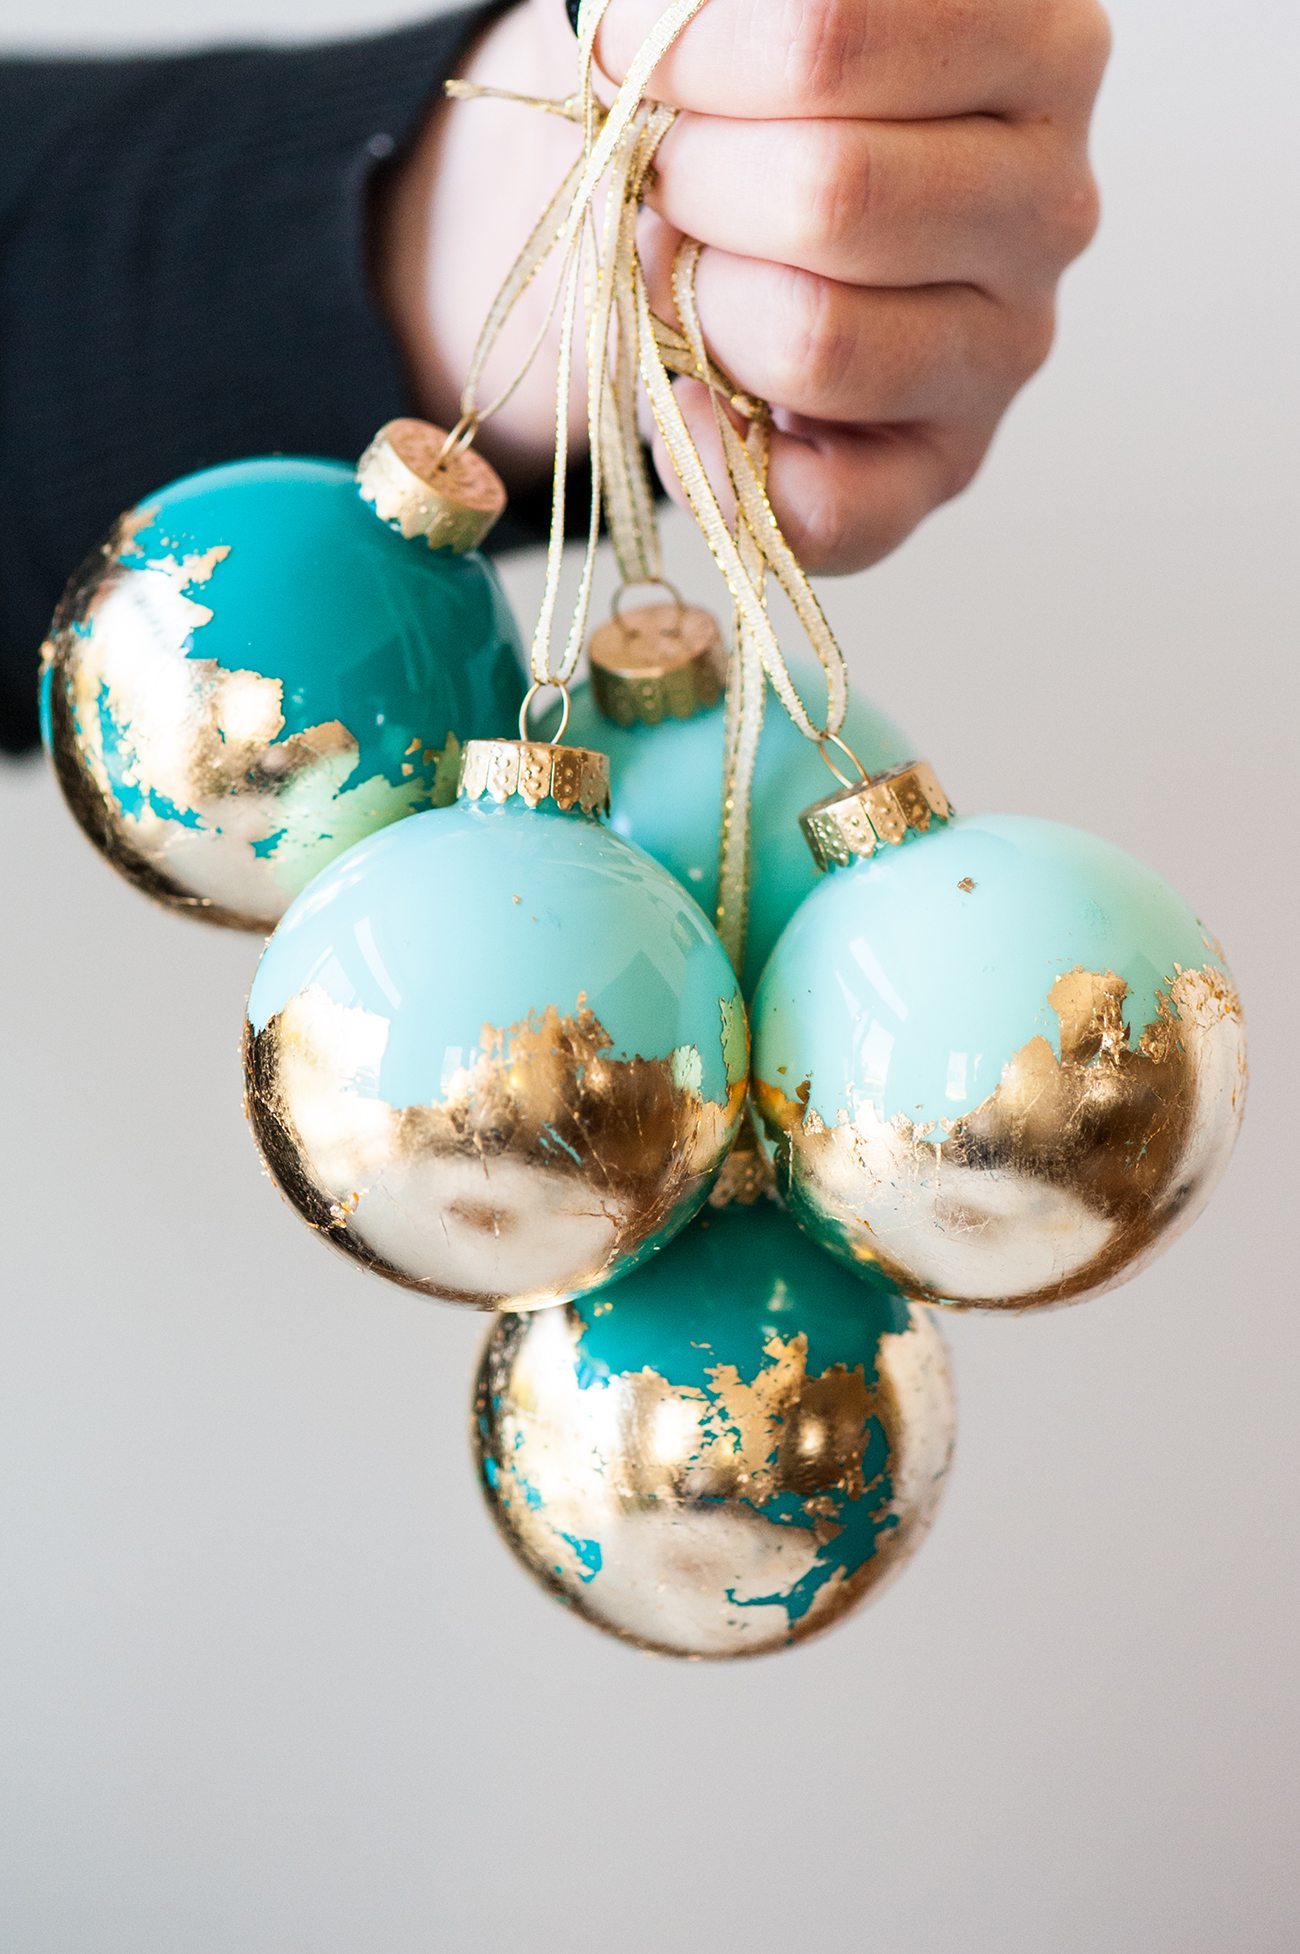 DIY Painted Gold Leaf Ornaments | Easy glass ornament craft ideas from @cydconverse